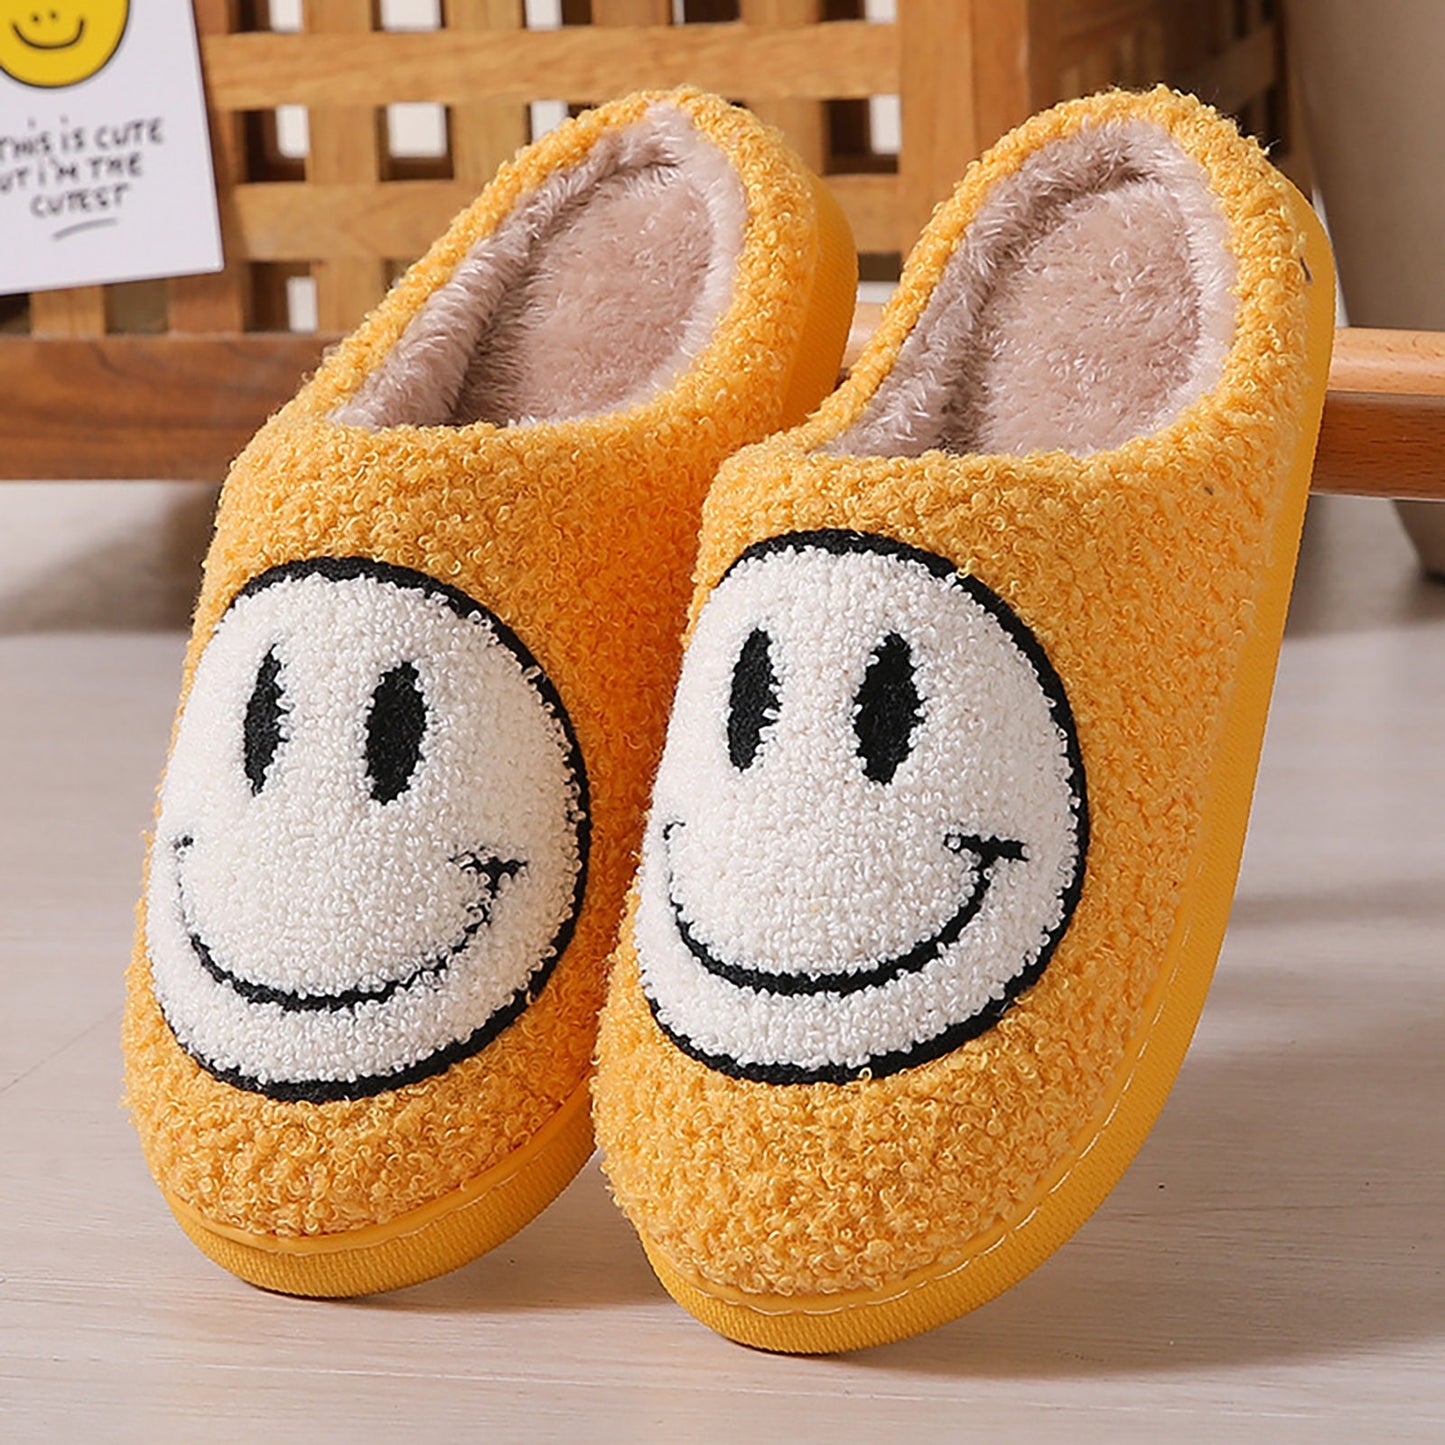 women's smiley face slippers